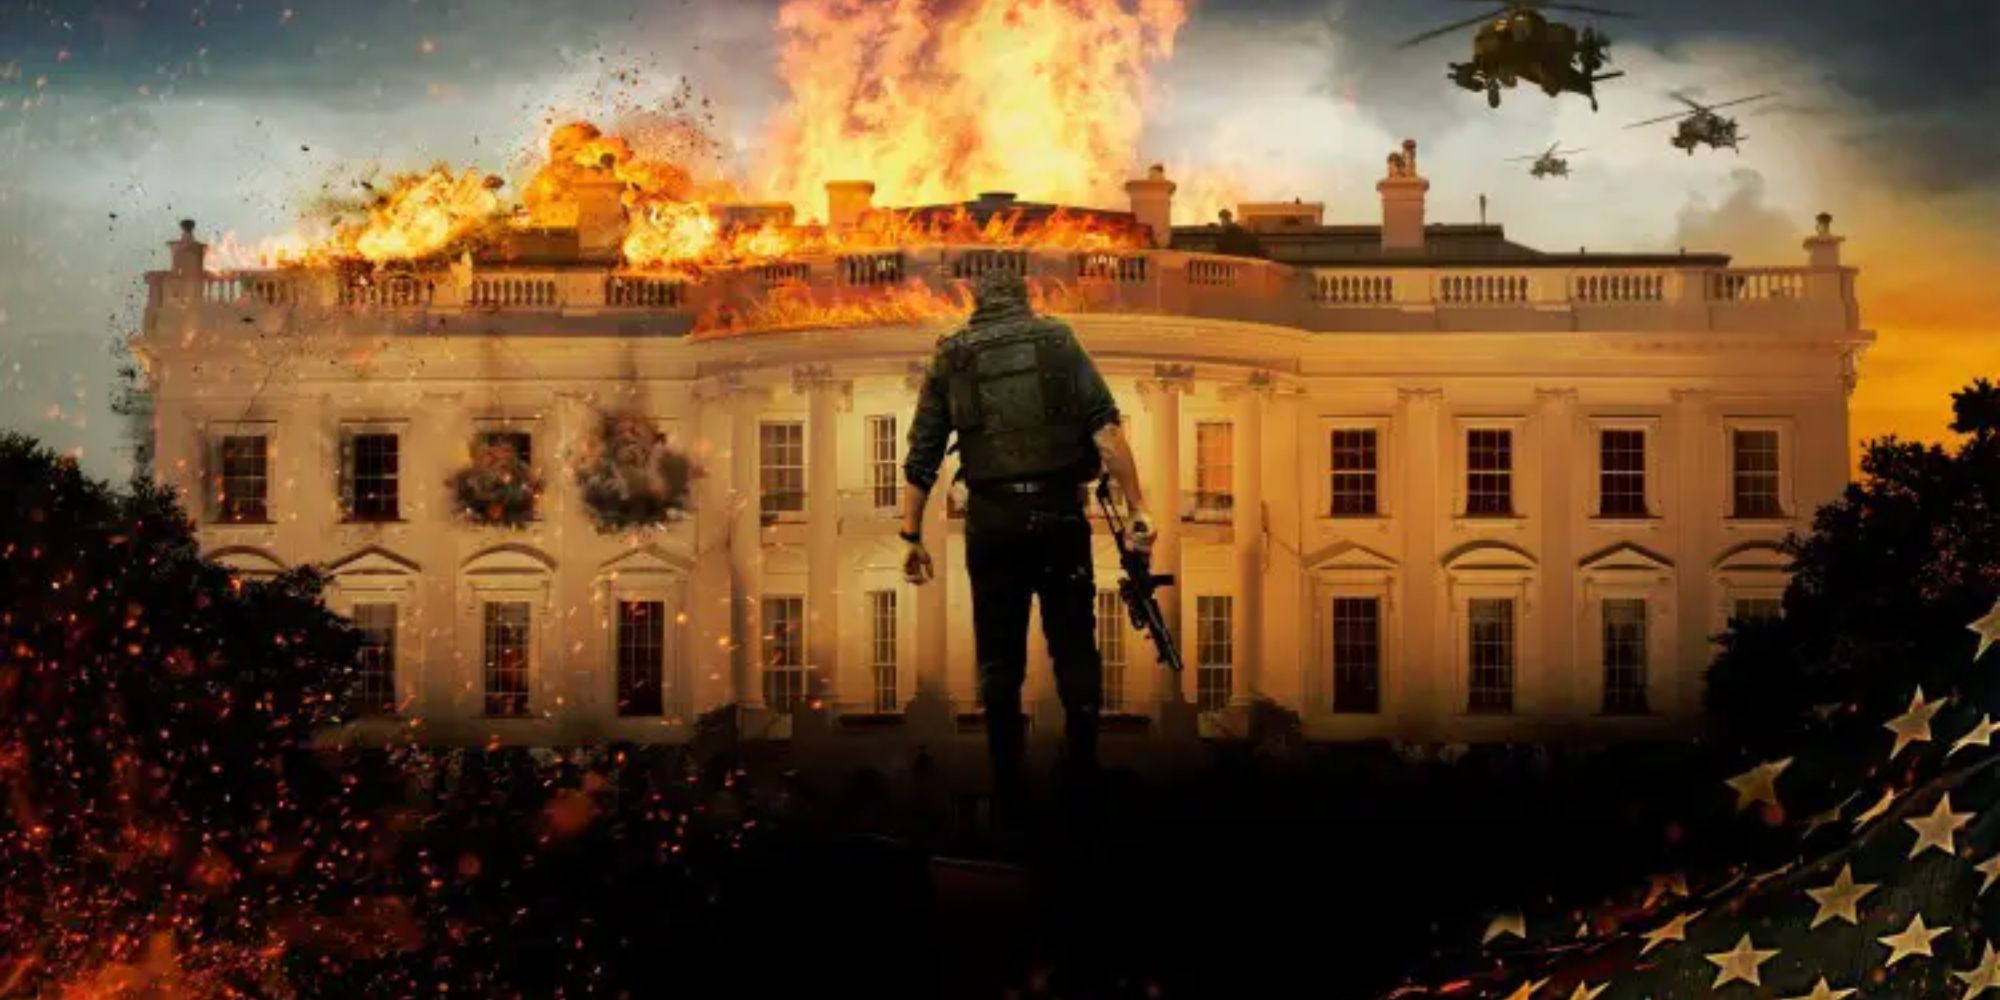 A man stands in front of the burning White House on Olympus Has Fallen.